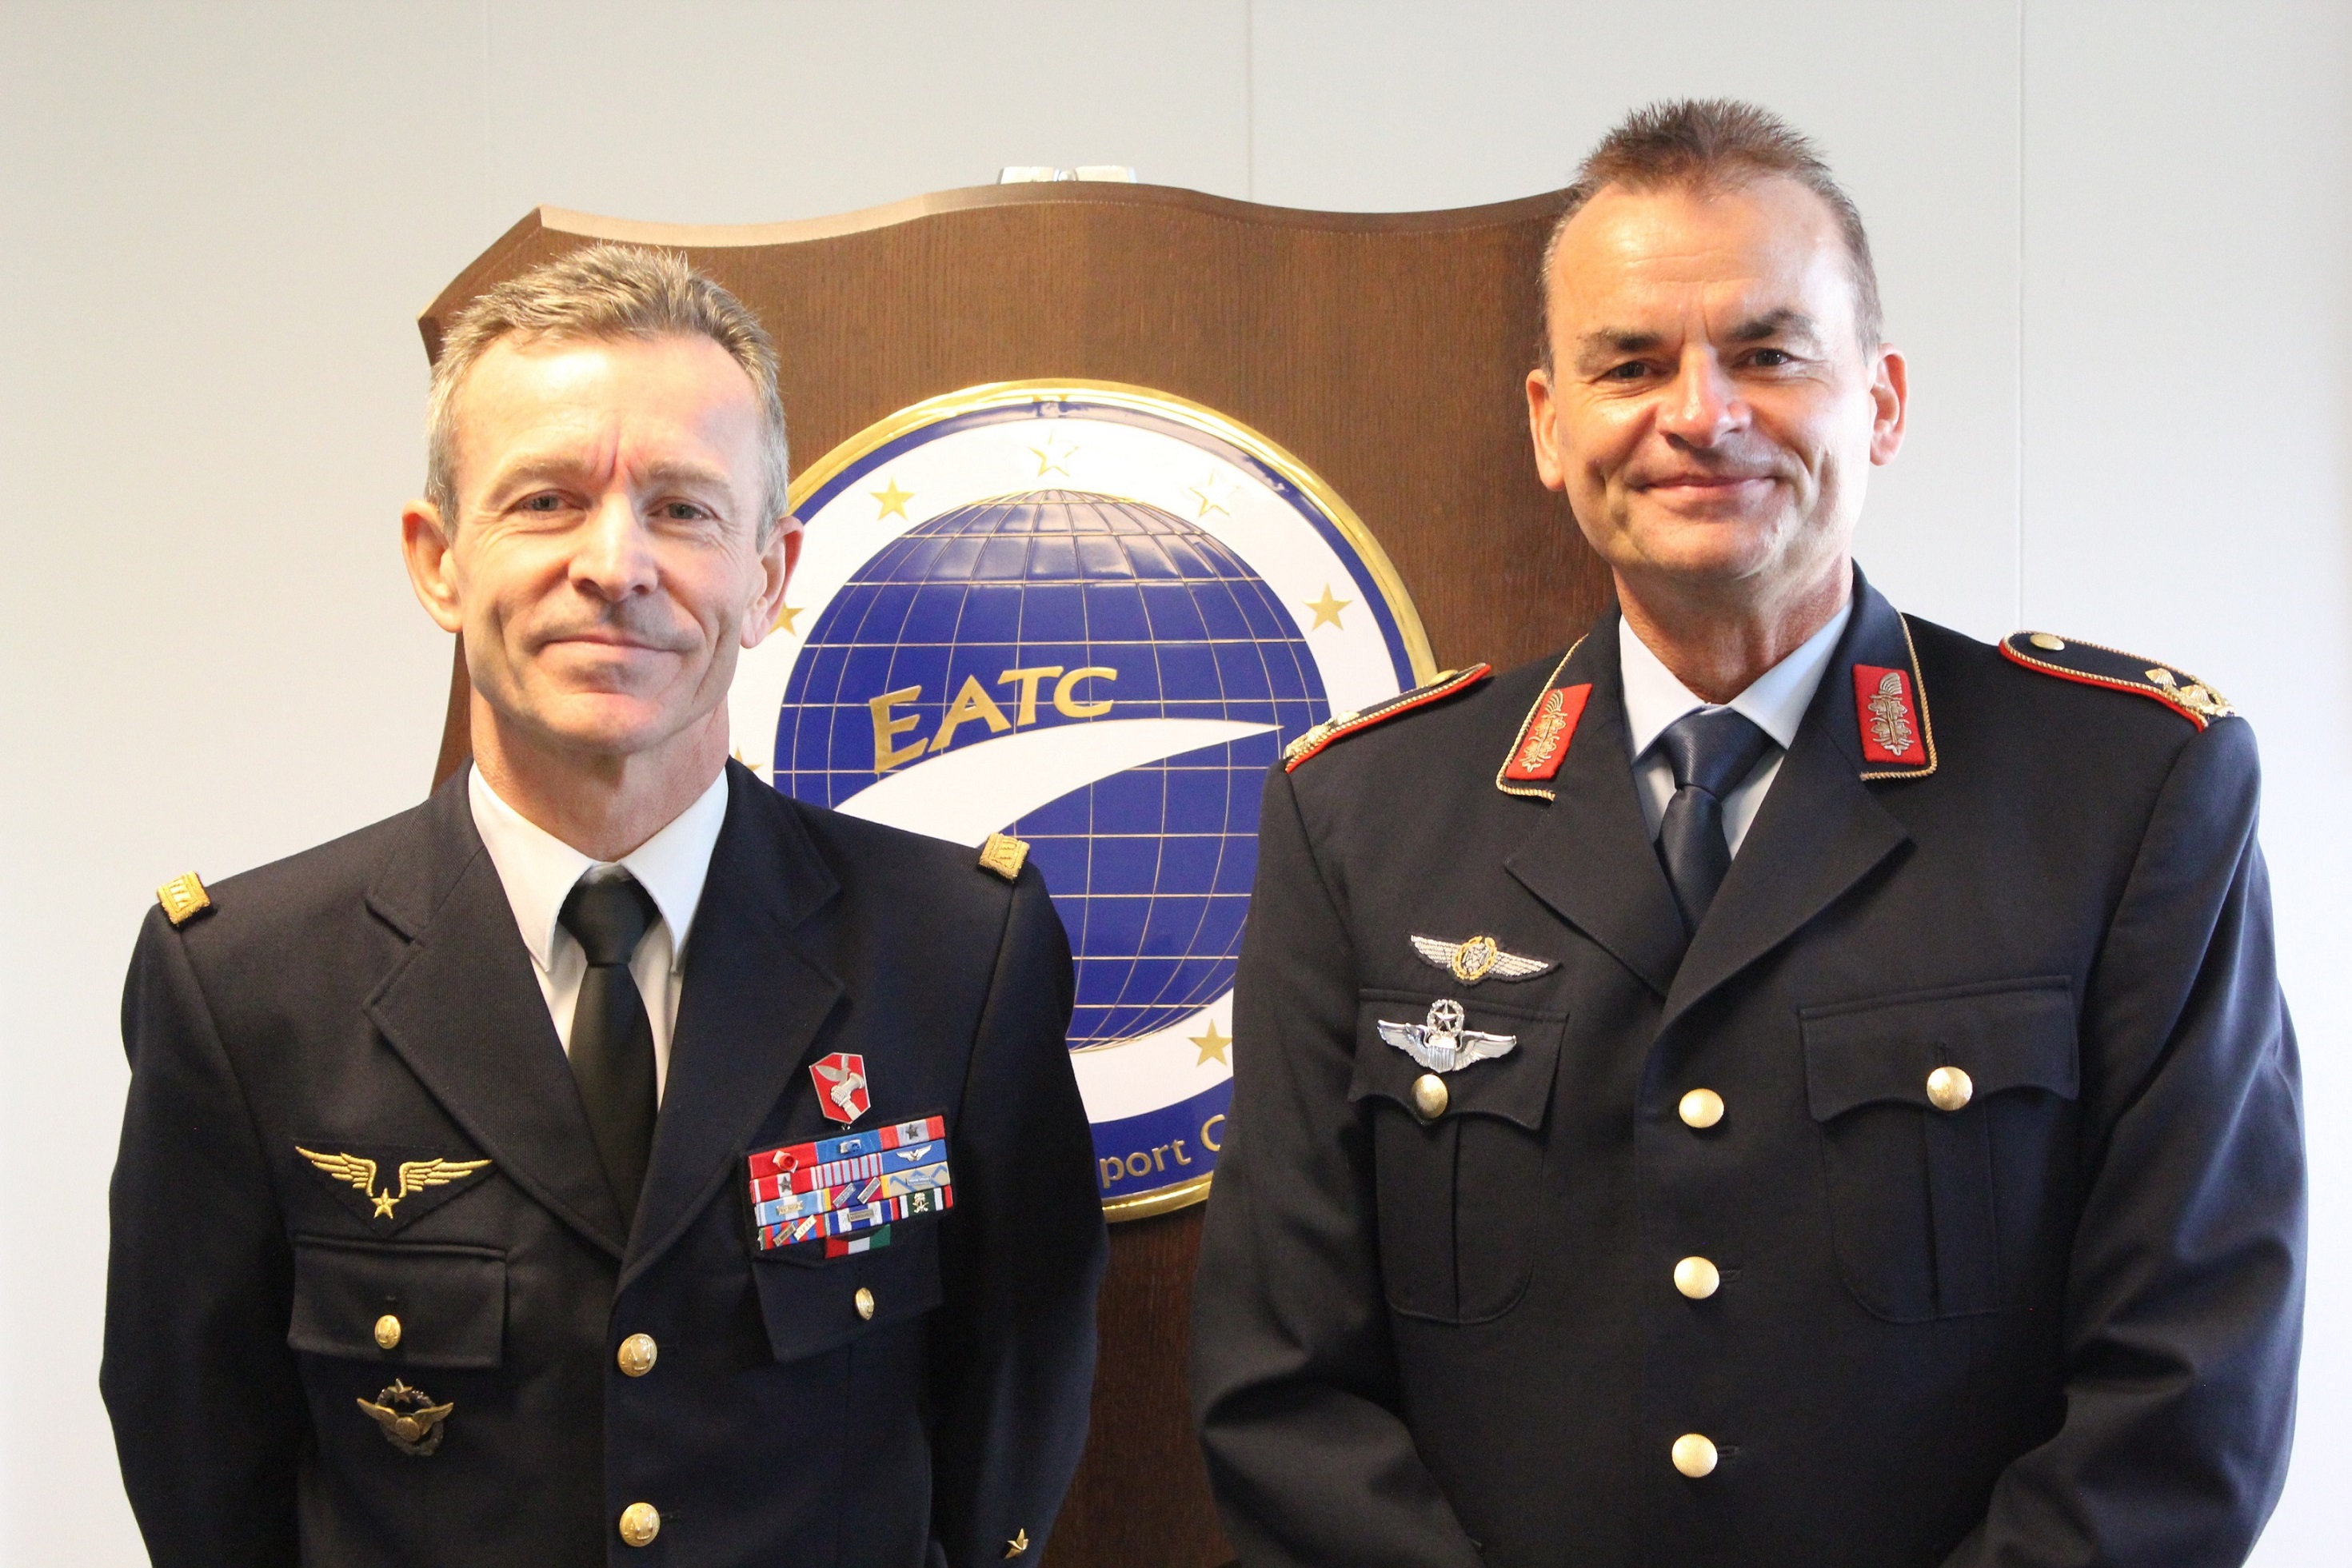 FRENCH COMMANDER “STRATEGIC AIR FORCE COMMAND” VISITS EATC